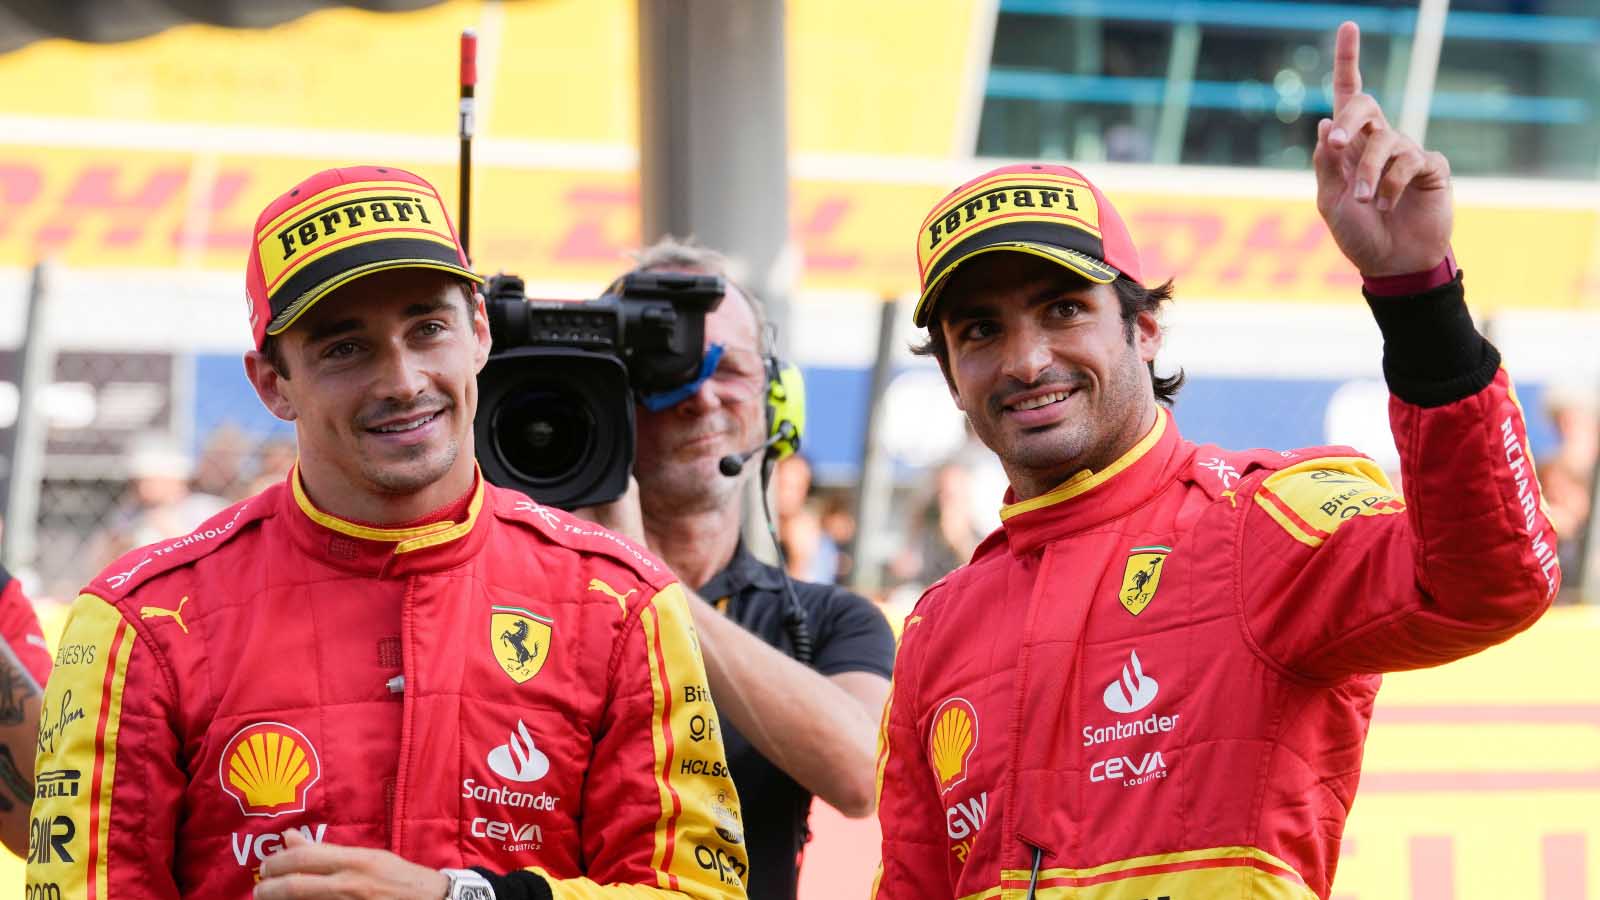 Charles Leclerc and Carlos Sainz after qualifying at Monza. F1 starting grid